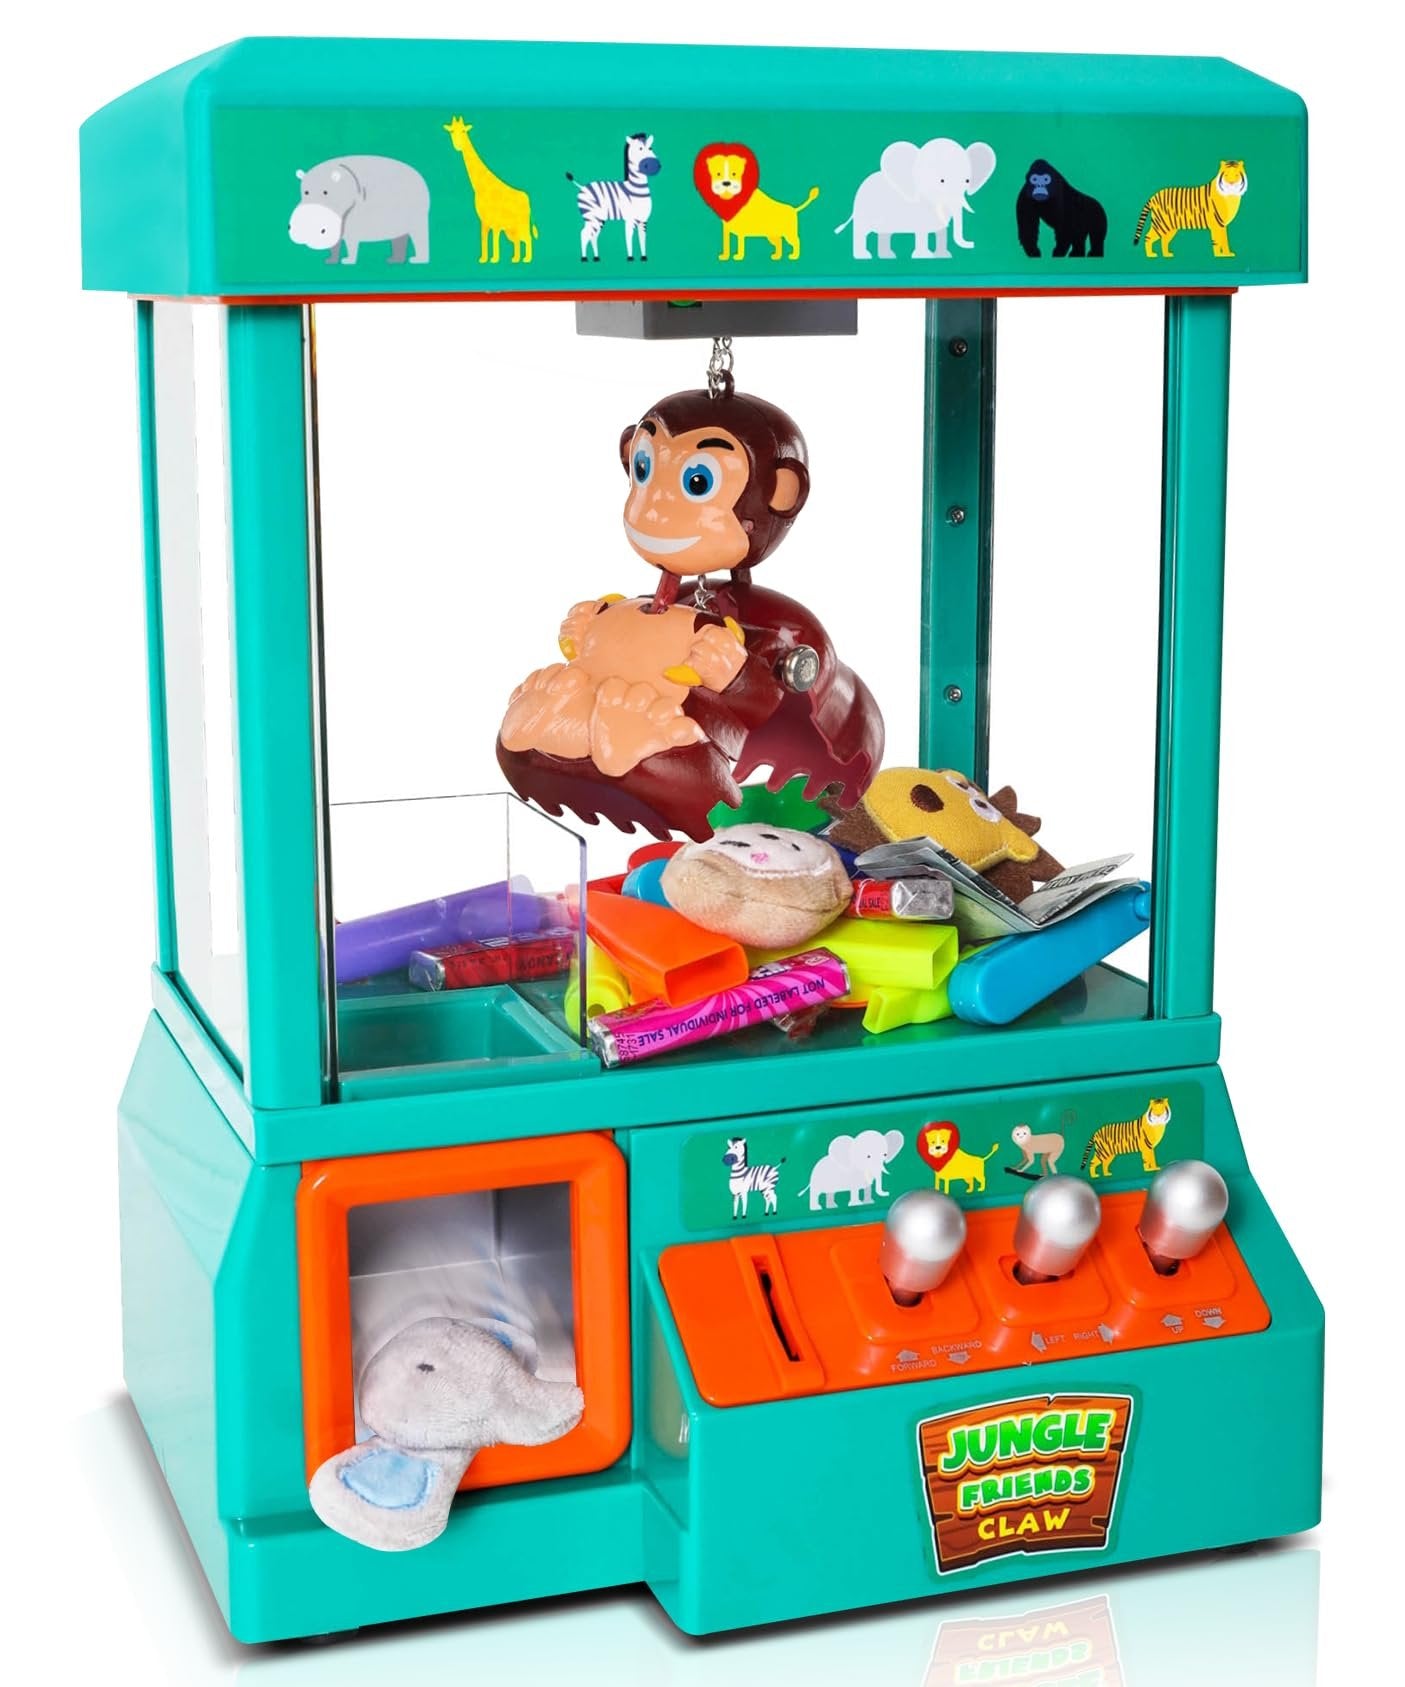 Bundaloo Claw Machine for Kids - Jungle Themed Miniature Candy Grabber with 3 Mini Plush Toys, 30 Reusable Tokens - Electronic Prize Dispenser Toy Party Game for Children